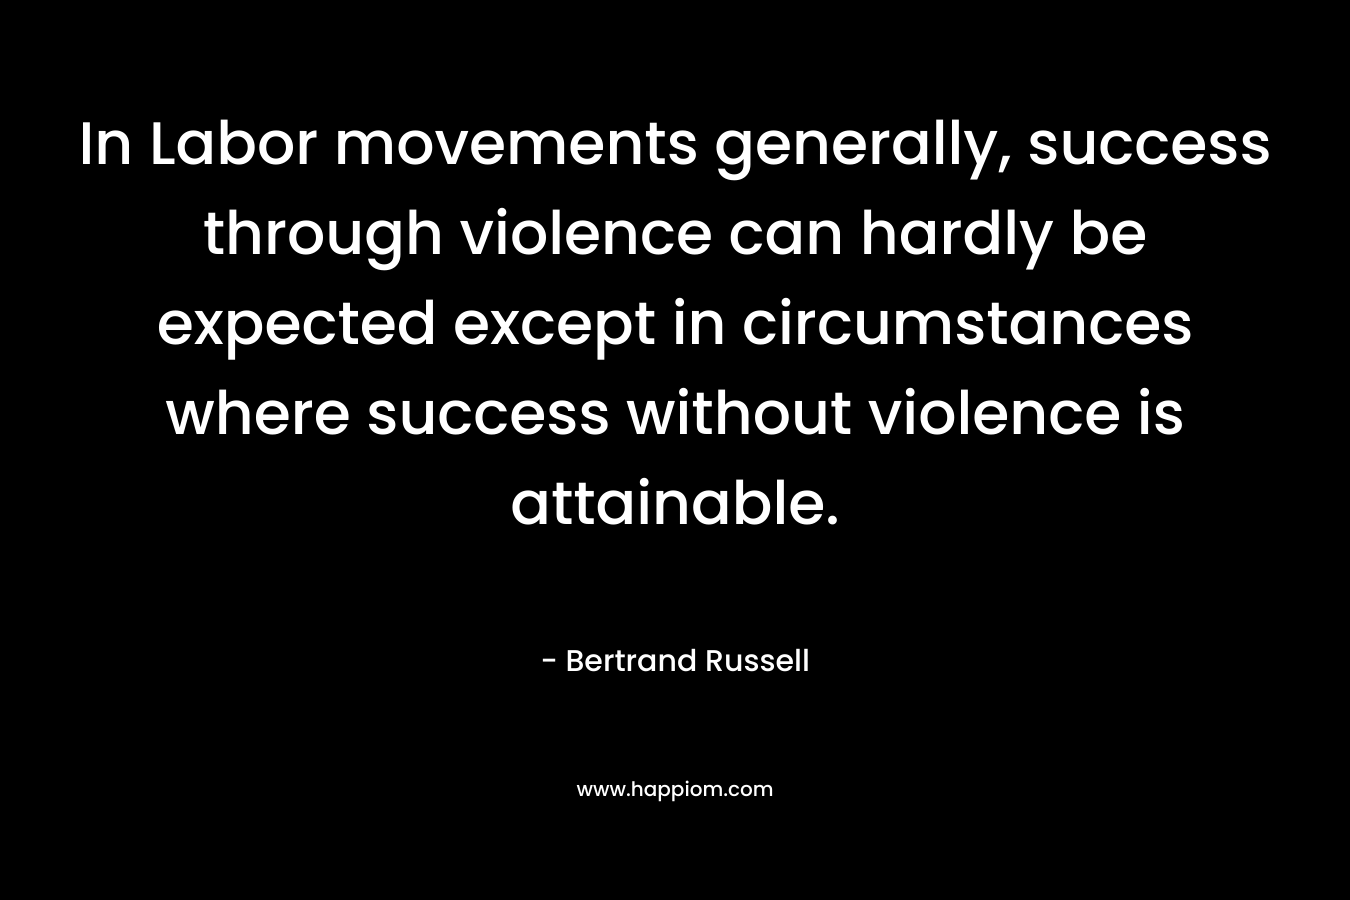 In Labor movements generally, success through violence can hardly be expected except in circumstances where success without violence is attainable.